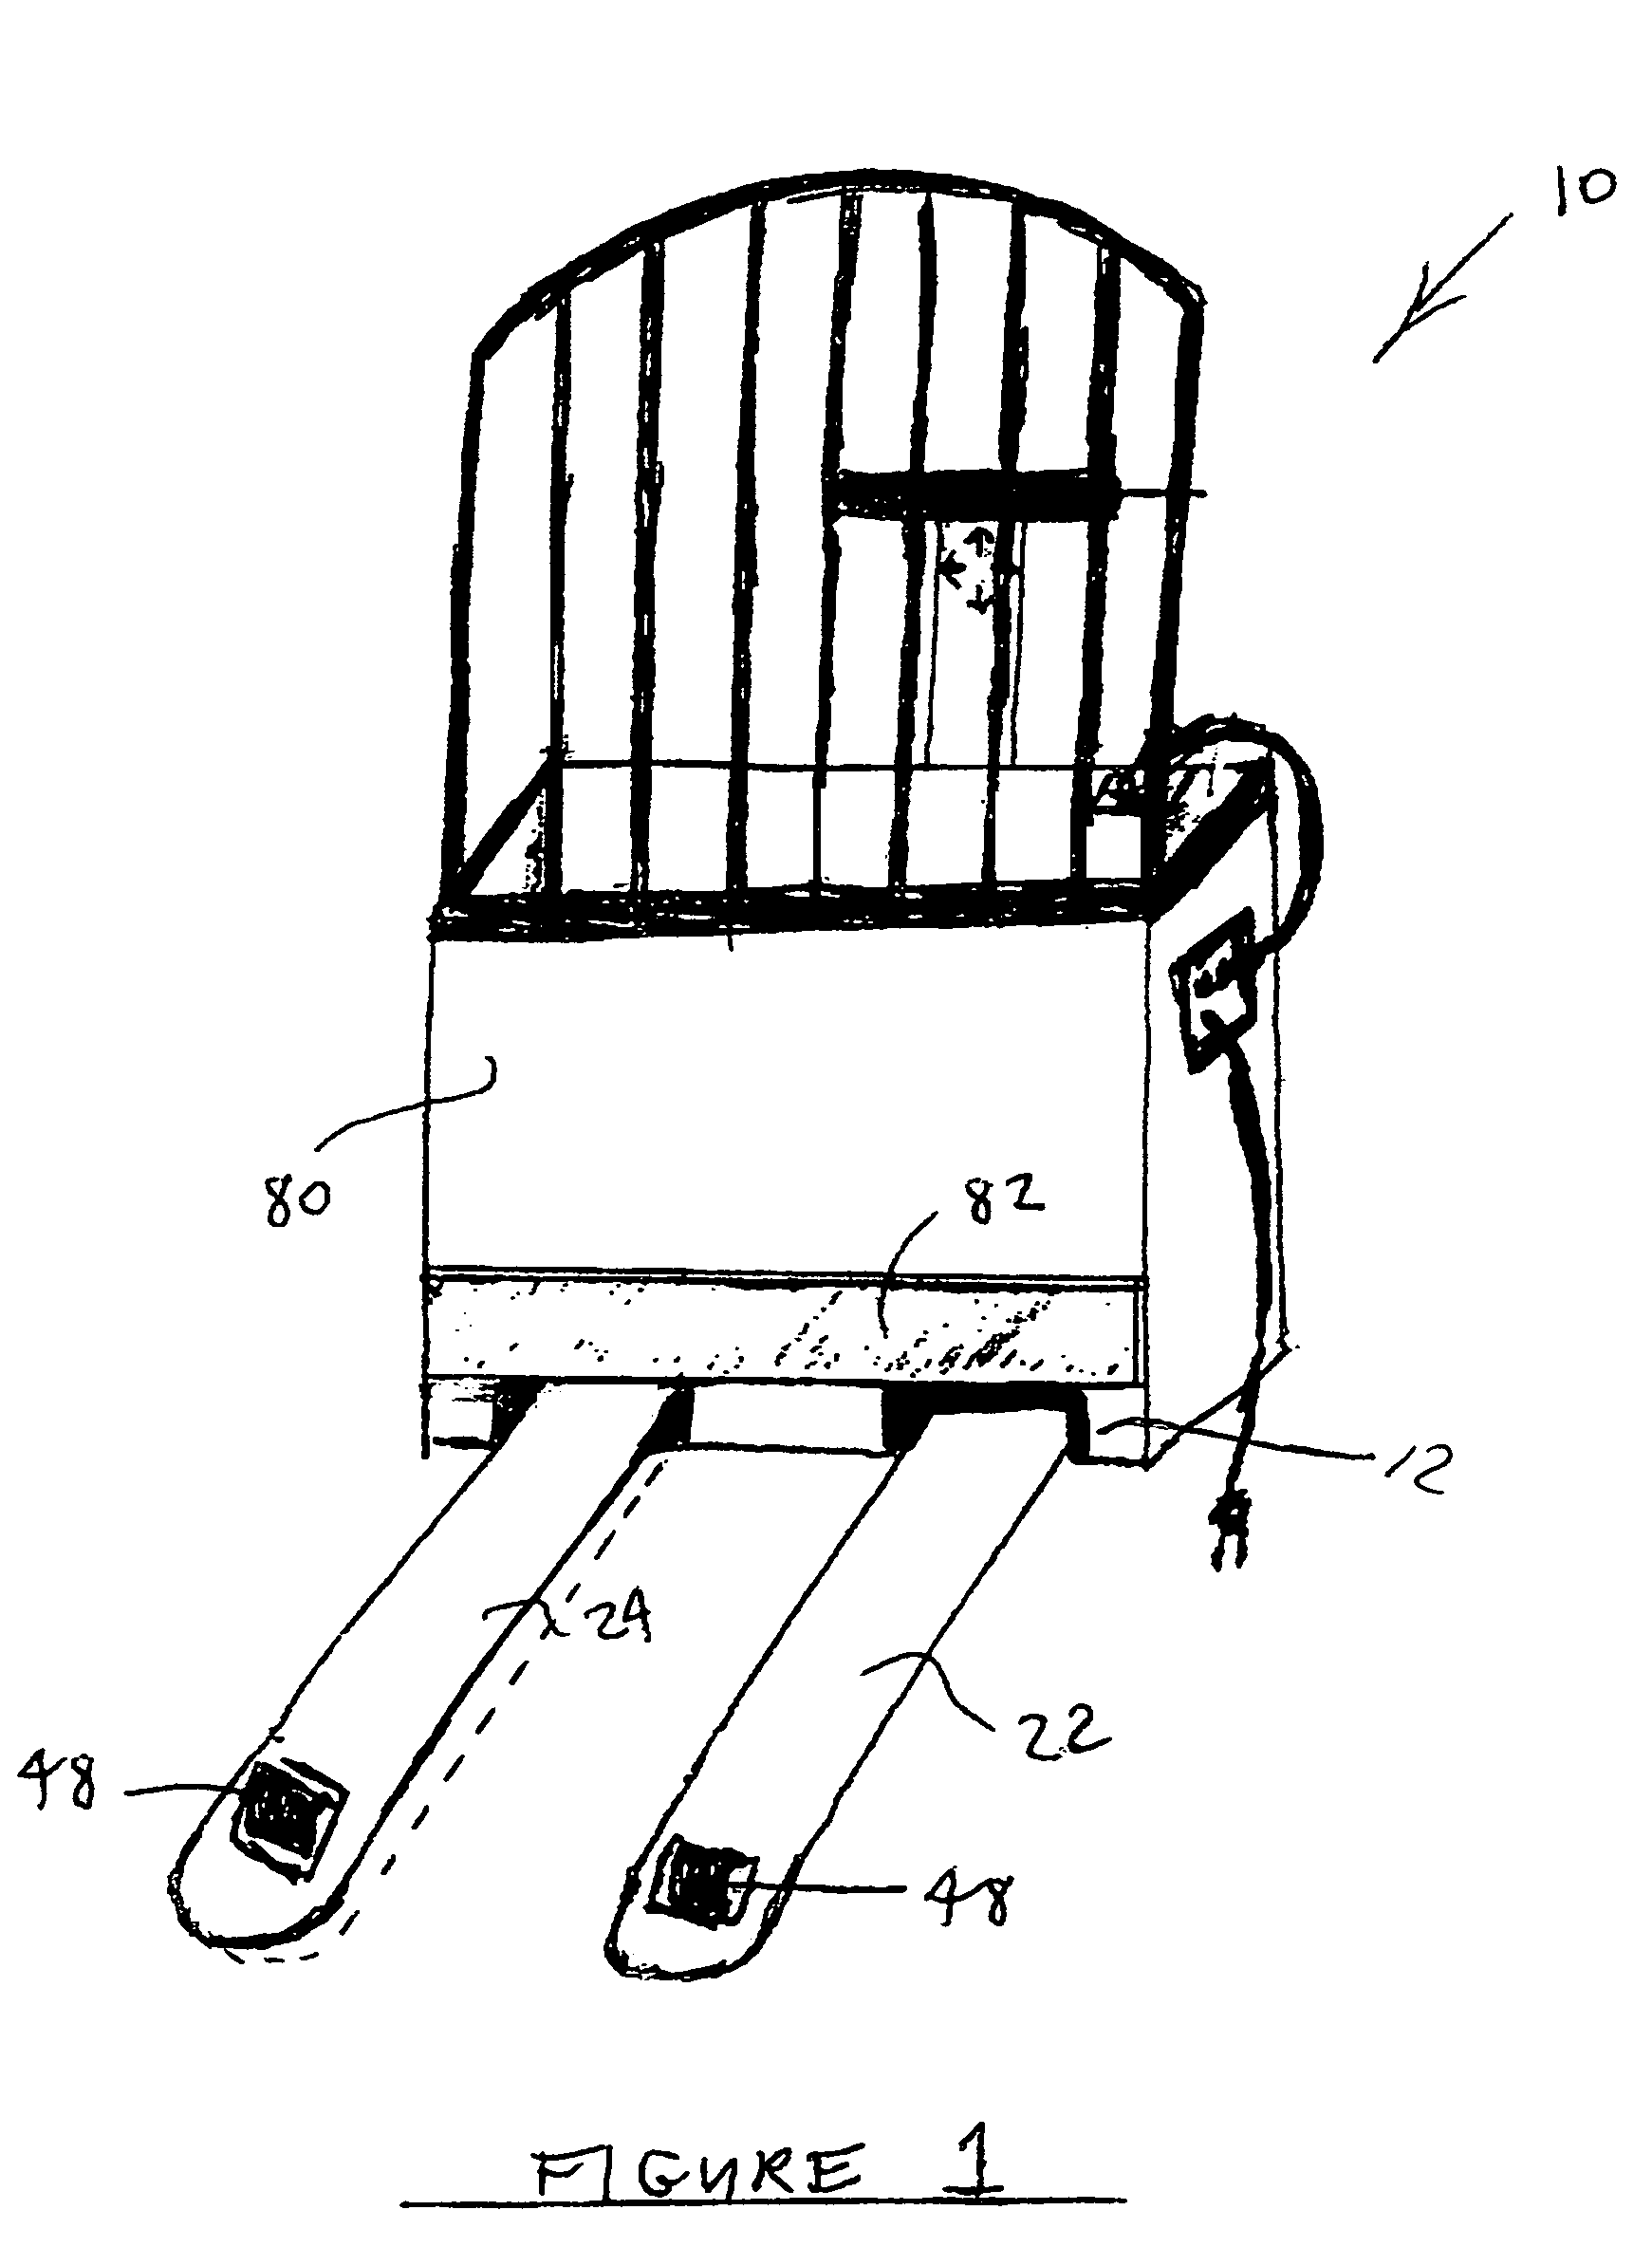 Pallet jack with independently elevatable fork arms